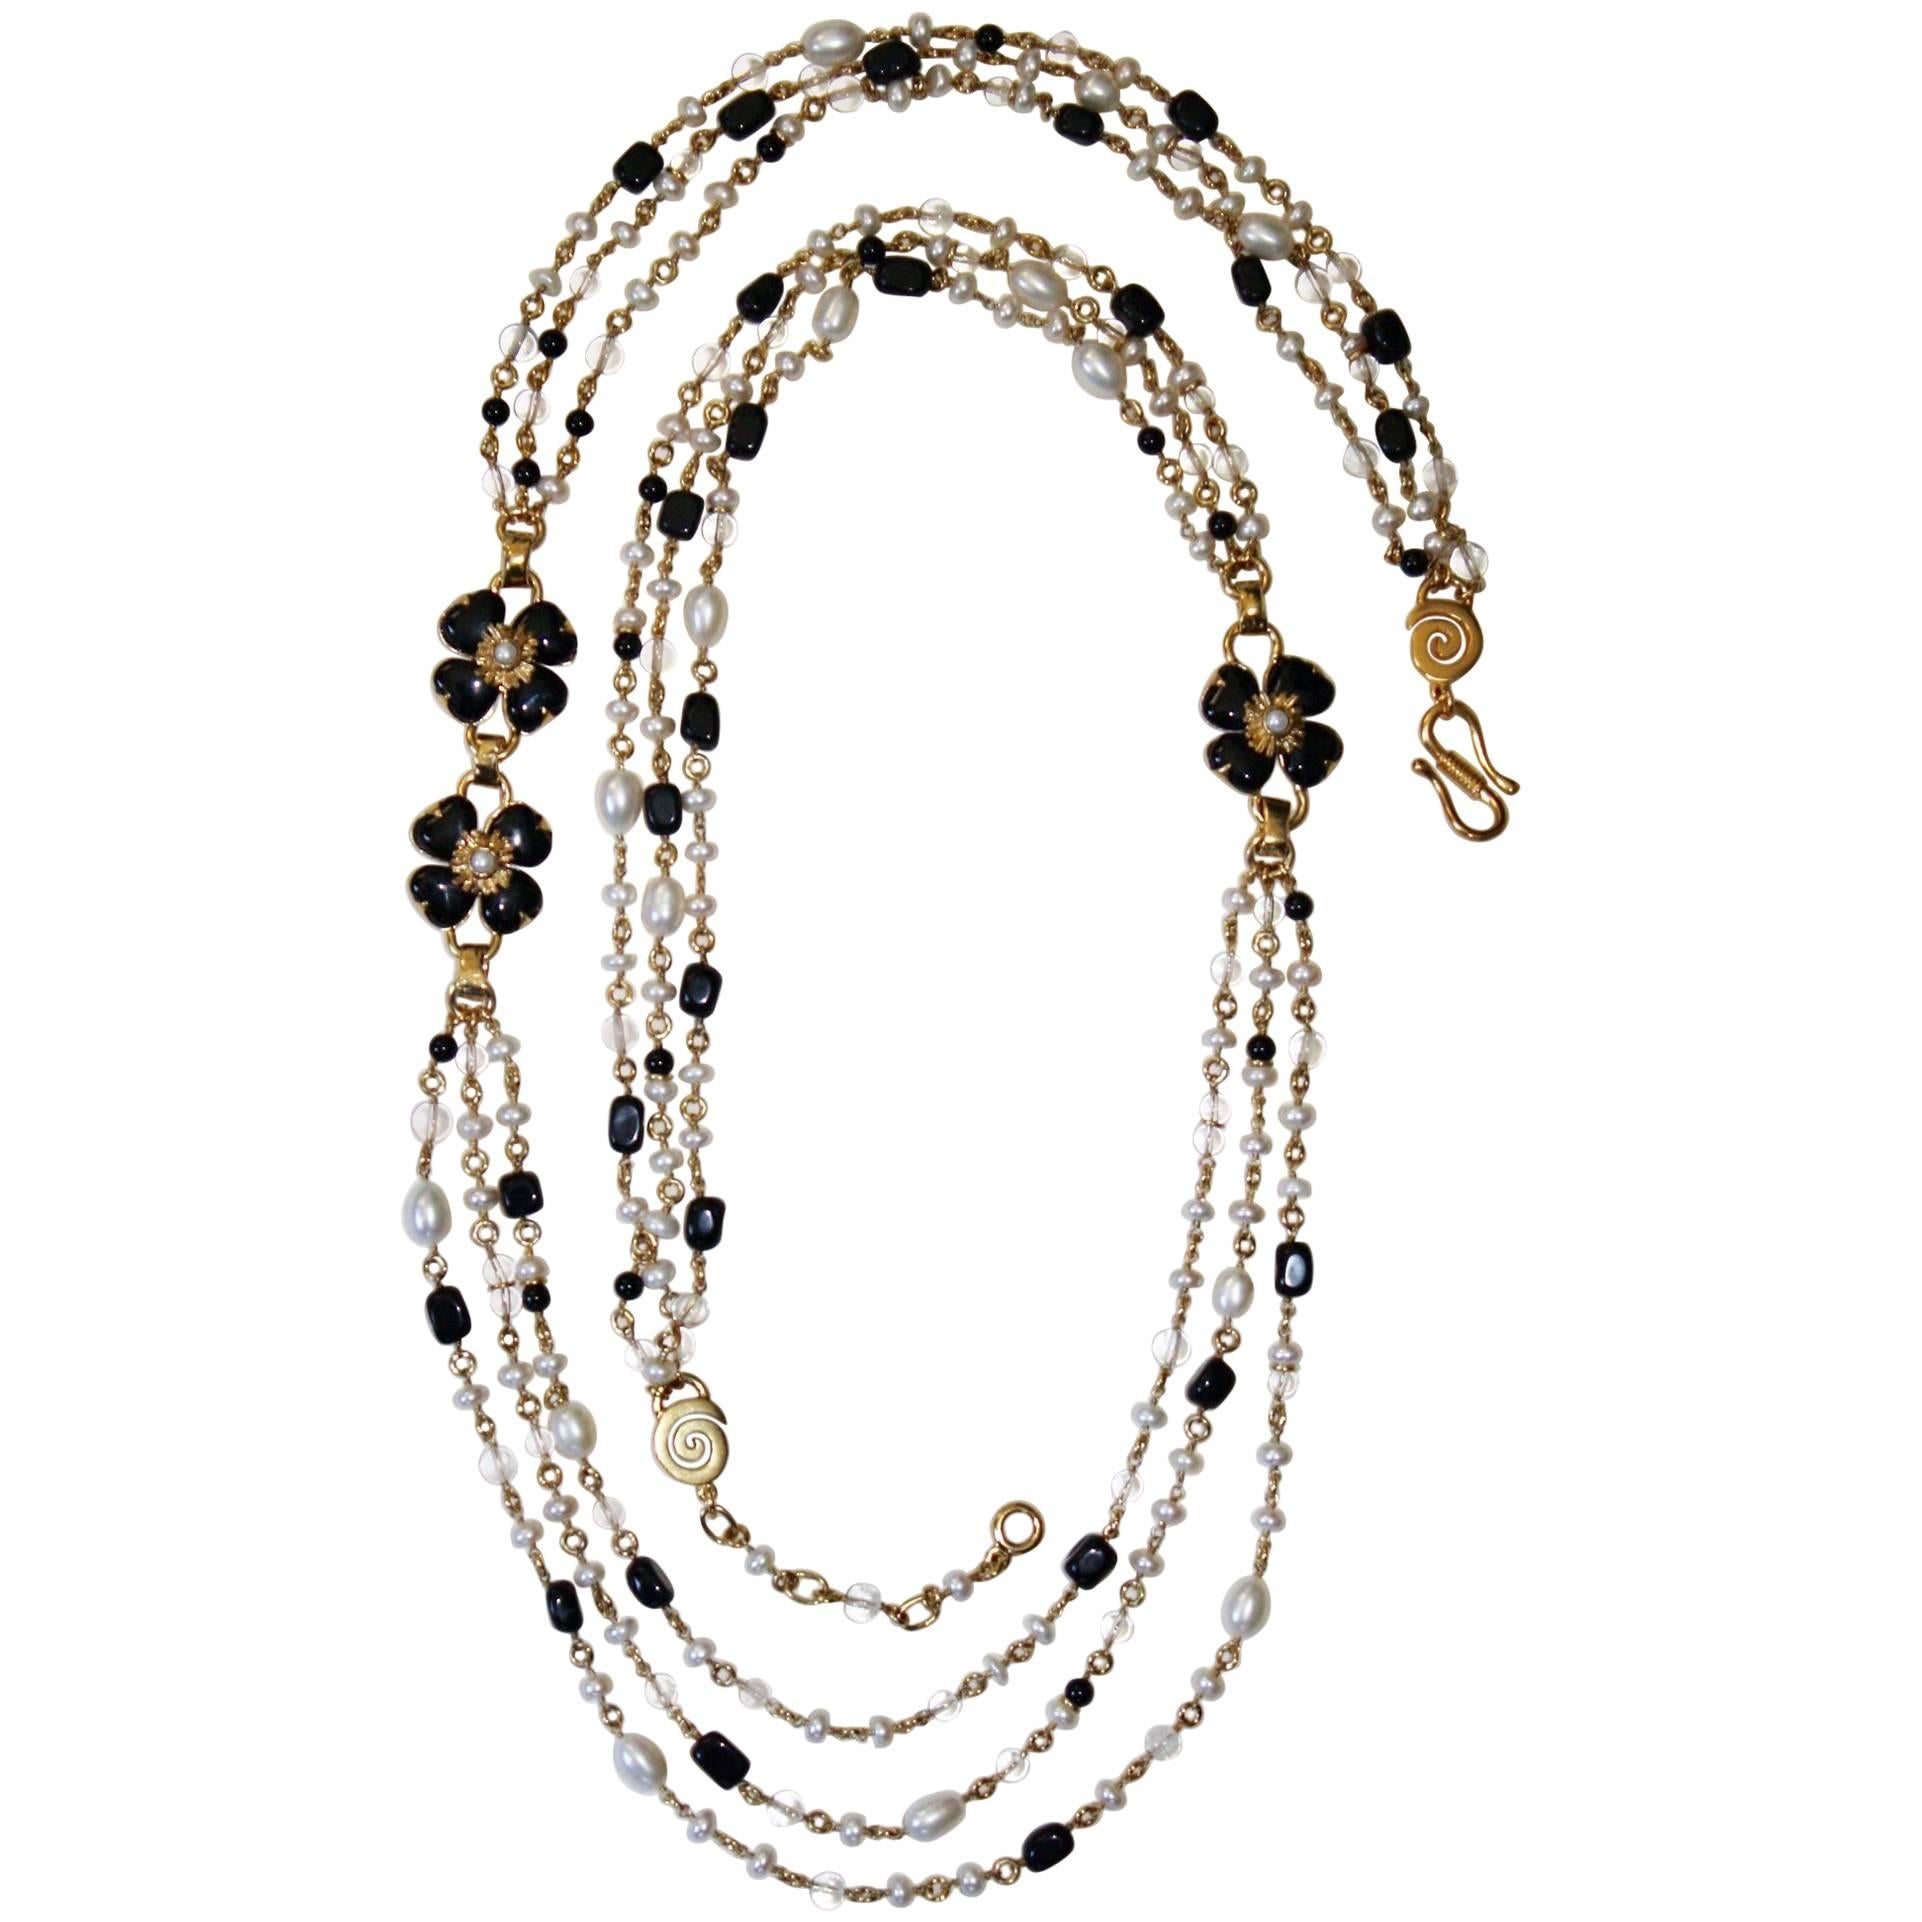 Goossens Paris Black Onyx, Pearl, and Rock Crystal Long Clover Necklace